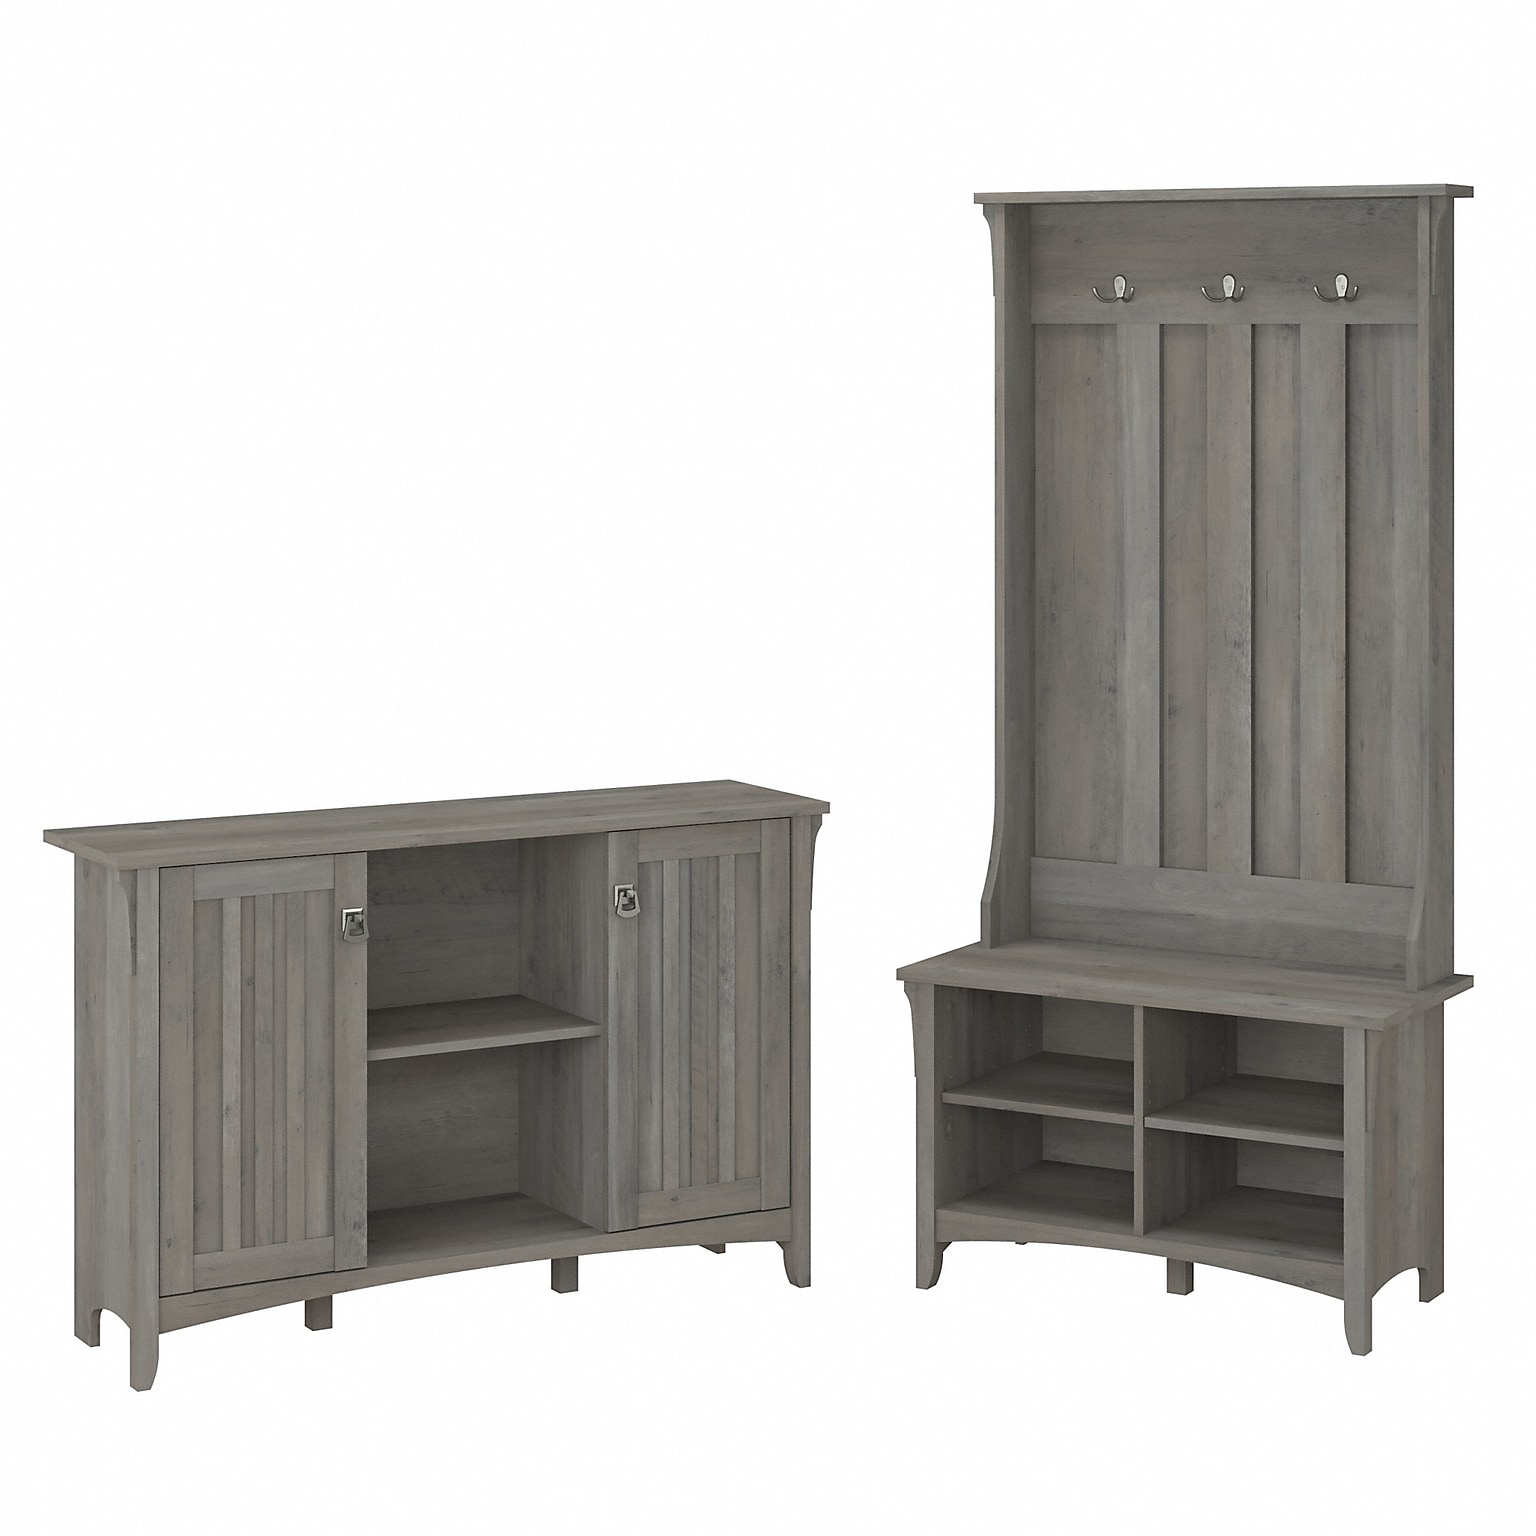 Bush Furniture Salinas 68.11 Storage Set with Hall Tree, Shoe Bench and Accent Cabinet, 5 Shelves, Driftwood Gray (SAL008DG)